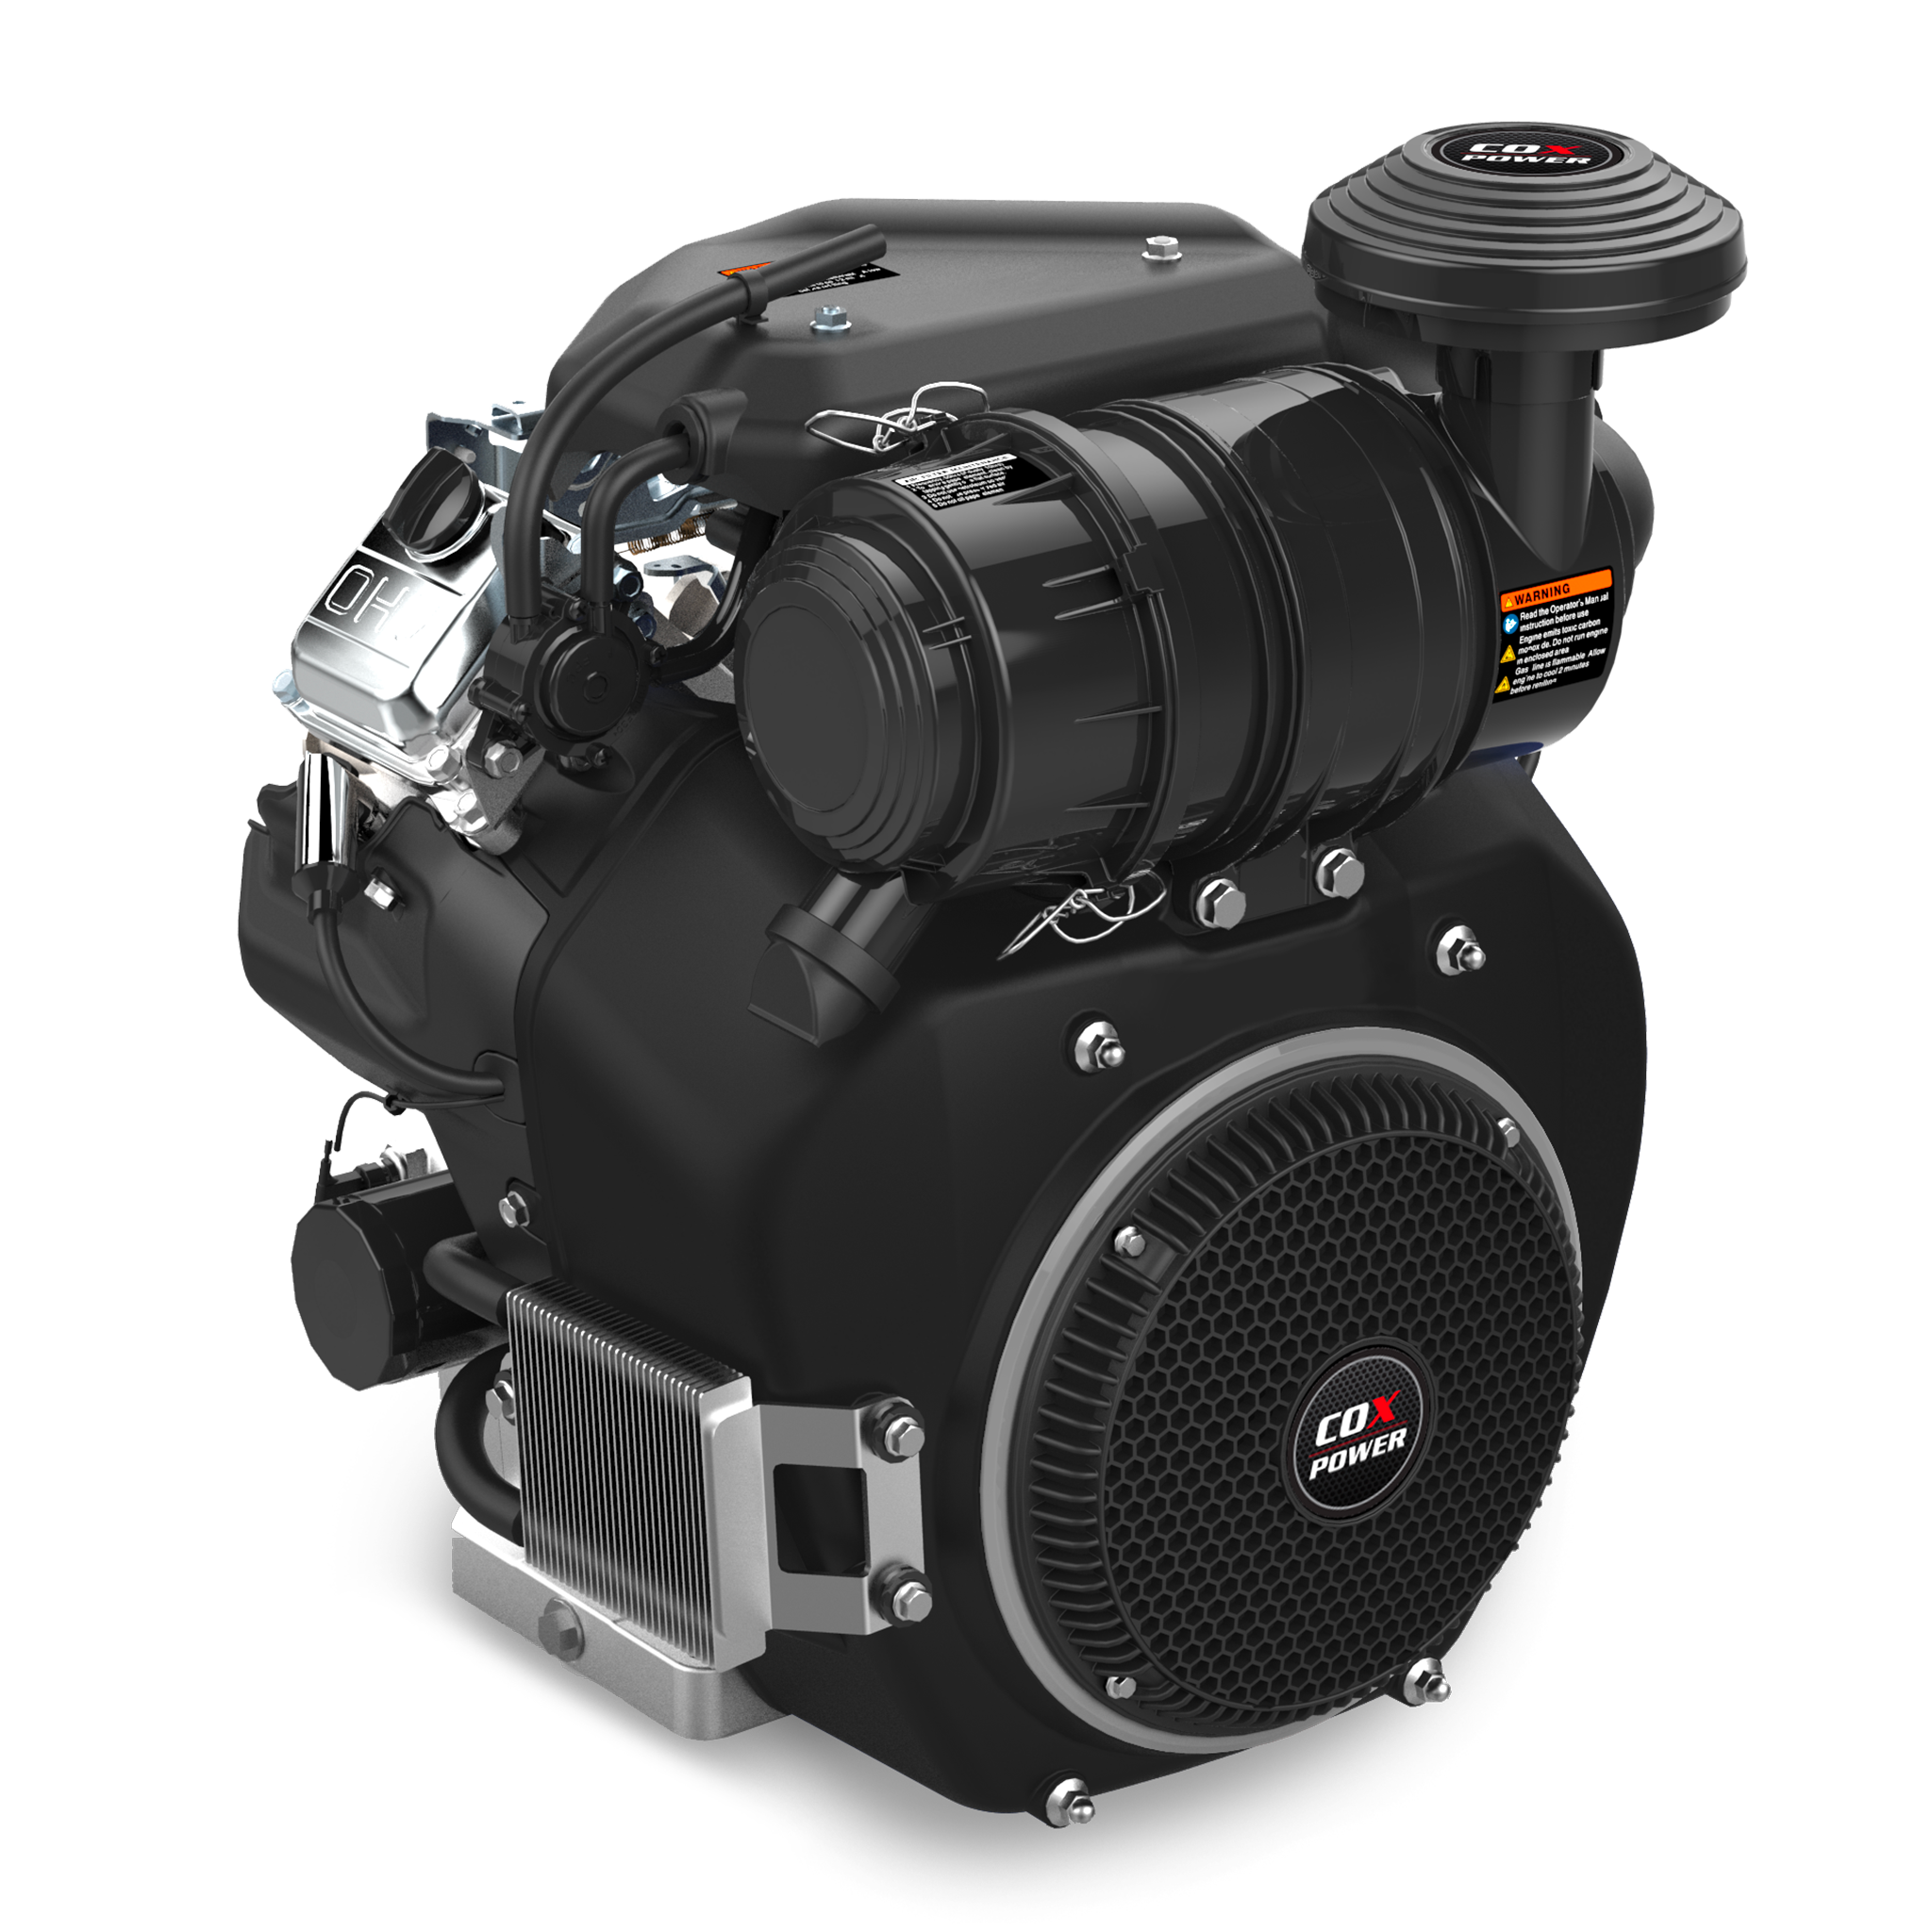 Product Image of a COX Power 35hp Keyway Shaft - V-Twin, Electric Start Horizontal Engine